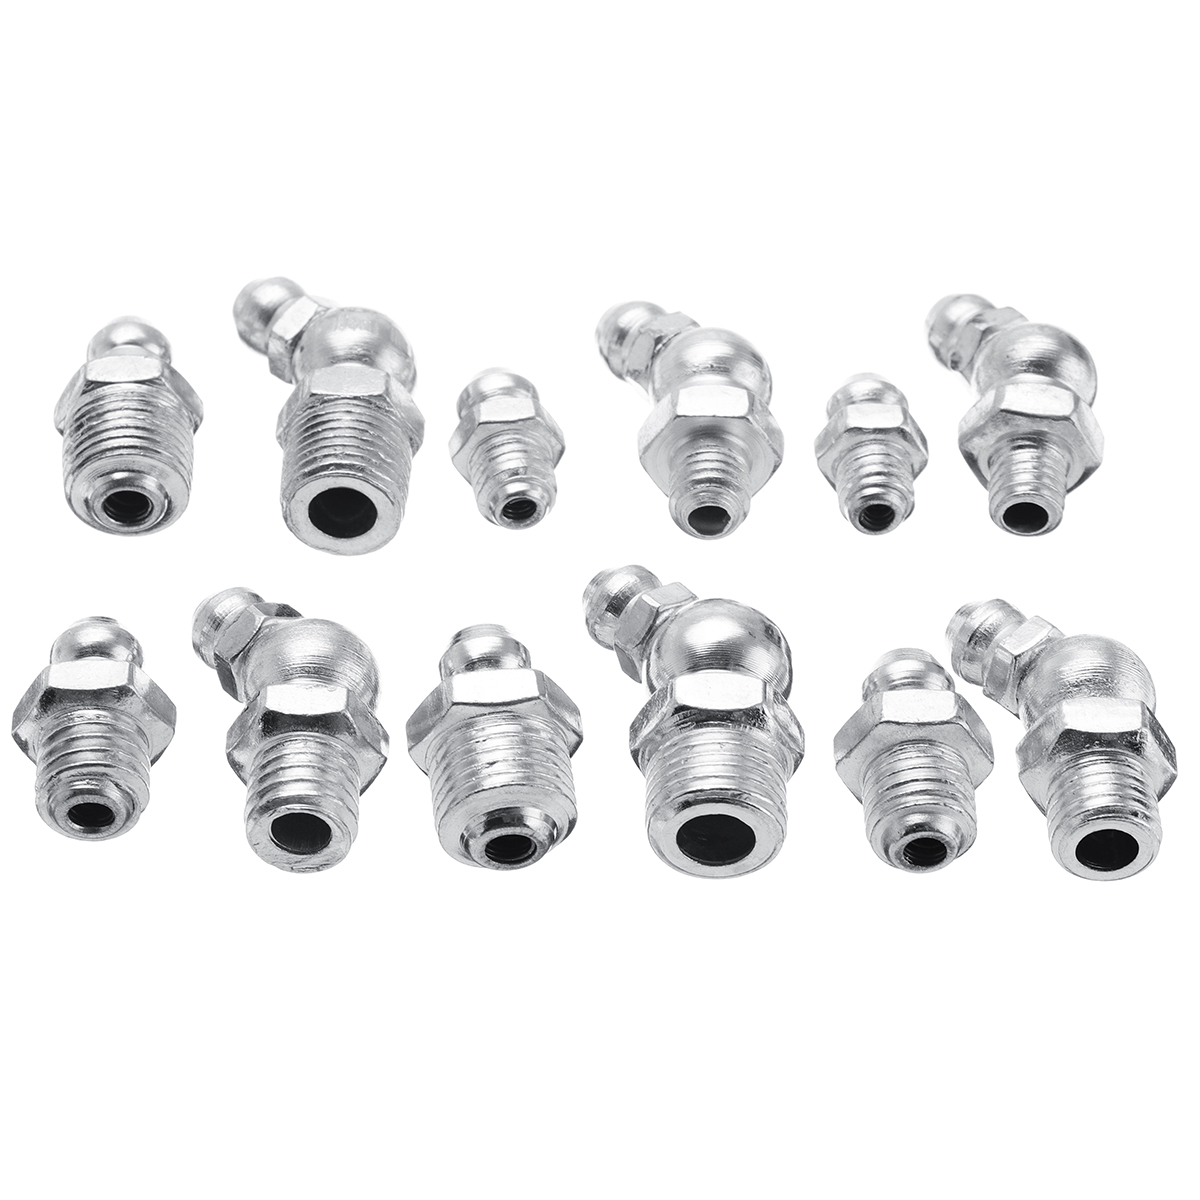 130pcs-Metric-Imperial-Fitting-BSP-UNF-M6-M8-M10-Assorted-Hydraulic-Grease-Nipples-Pipes-Fittings-1436097-4